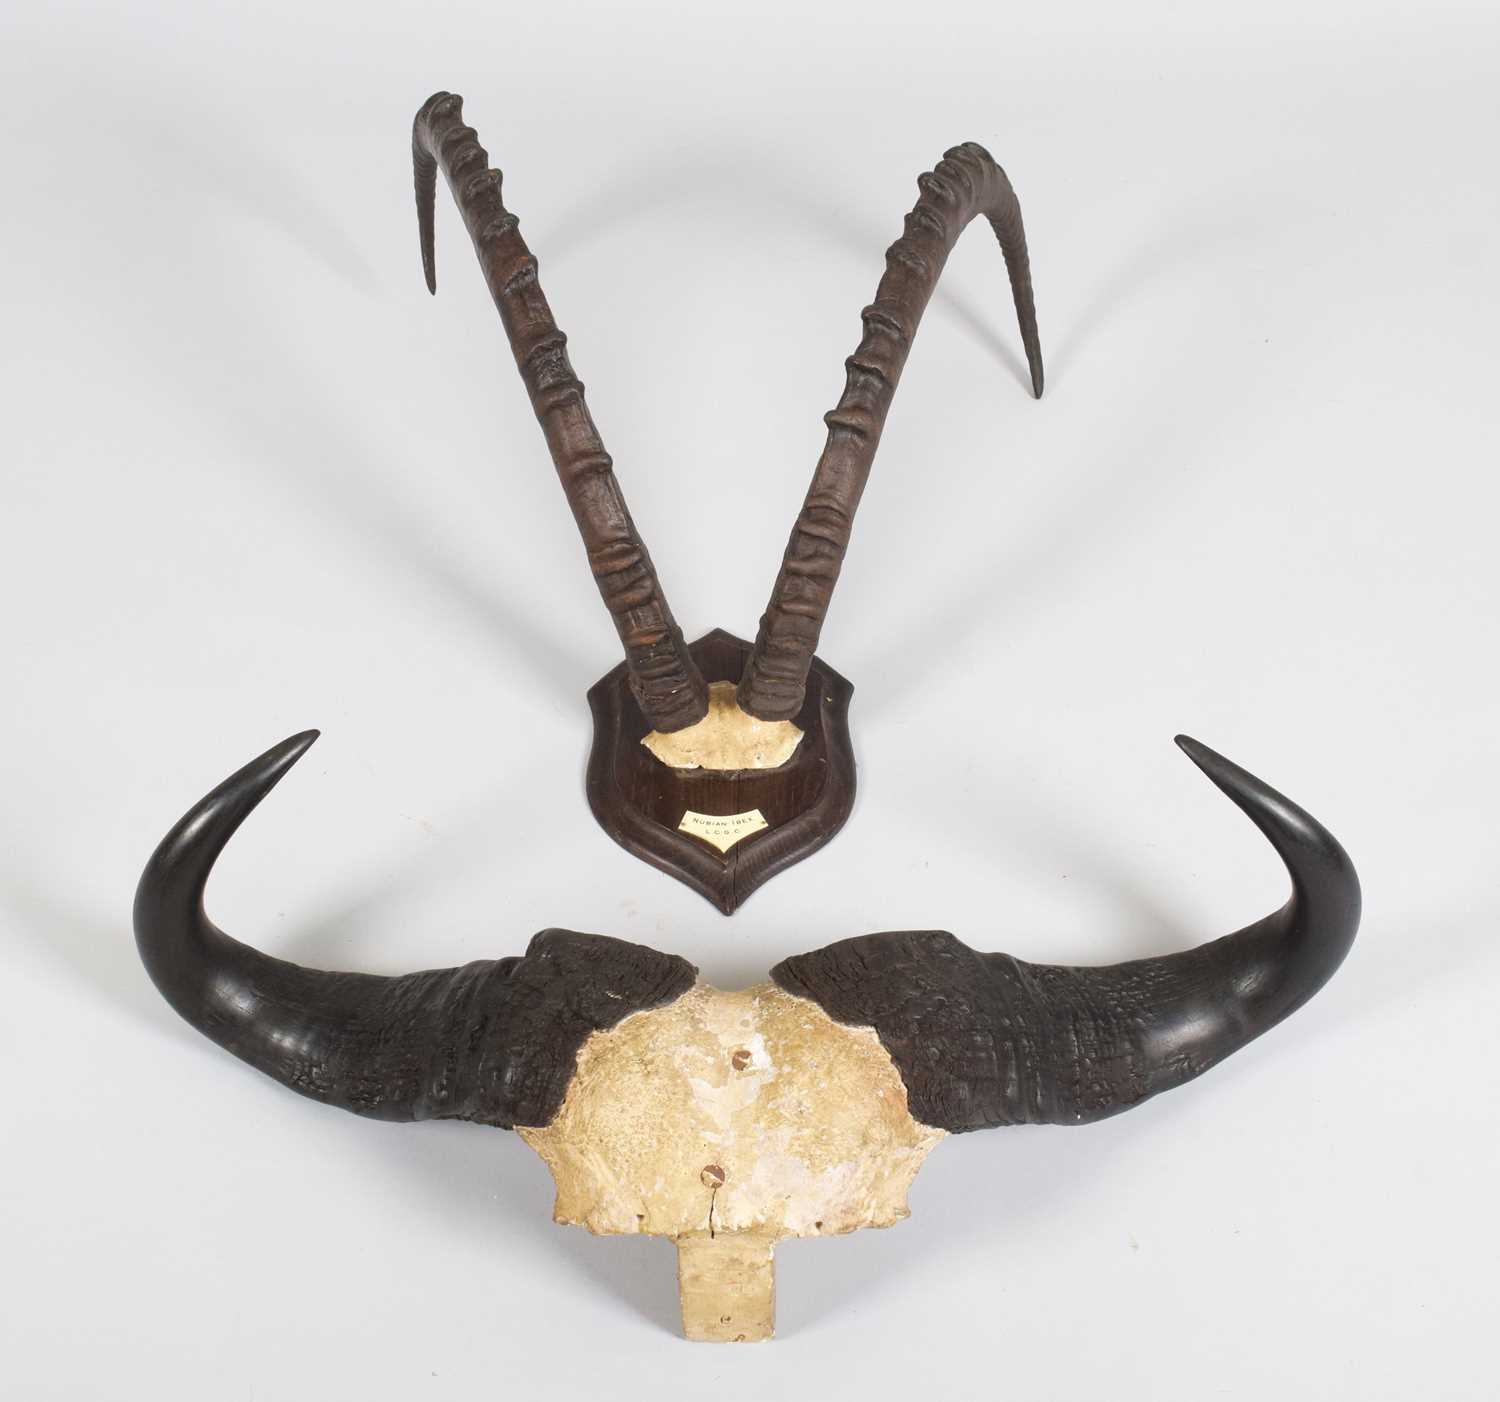 Antlers/Horns: A Set of Nubian Ibex Horns and Cape Buffalo Horns, circa 1900-1914, by Rowland Ward